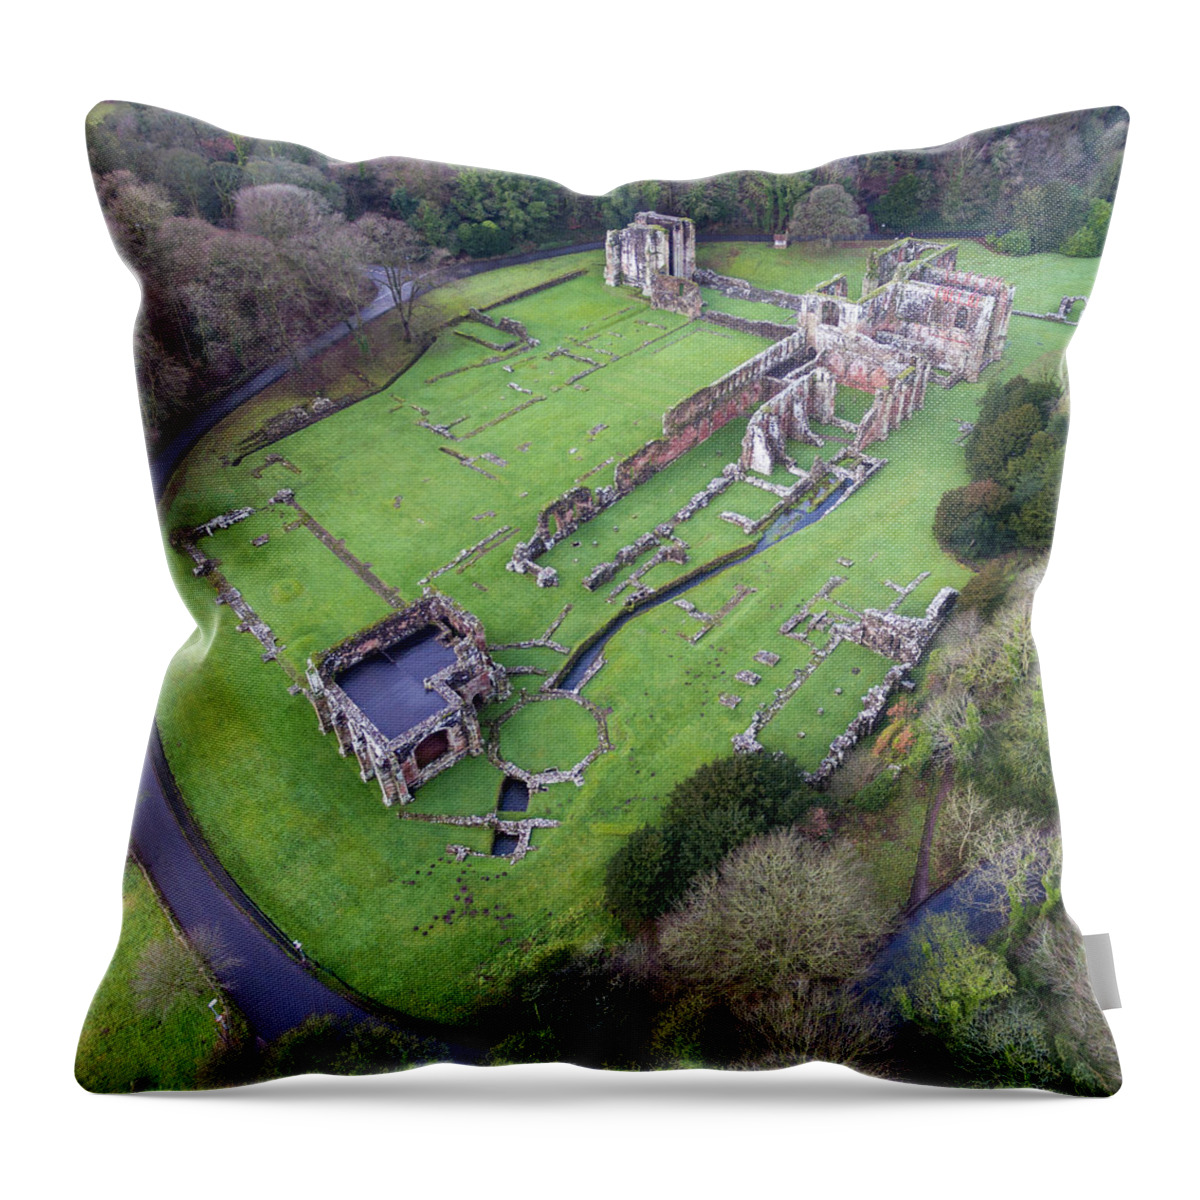 Furness Abbey Throw Pillow featuring the photograph Furness Abbey 2 by Steev Stamford